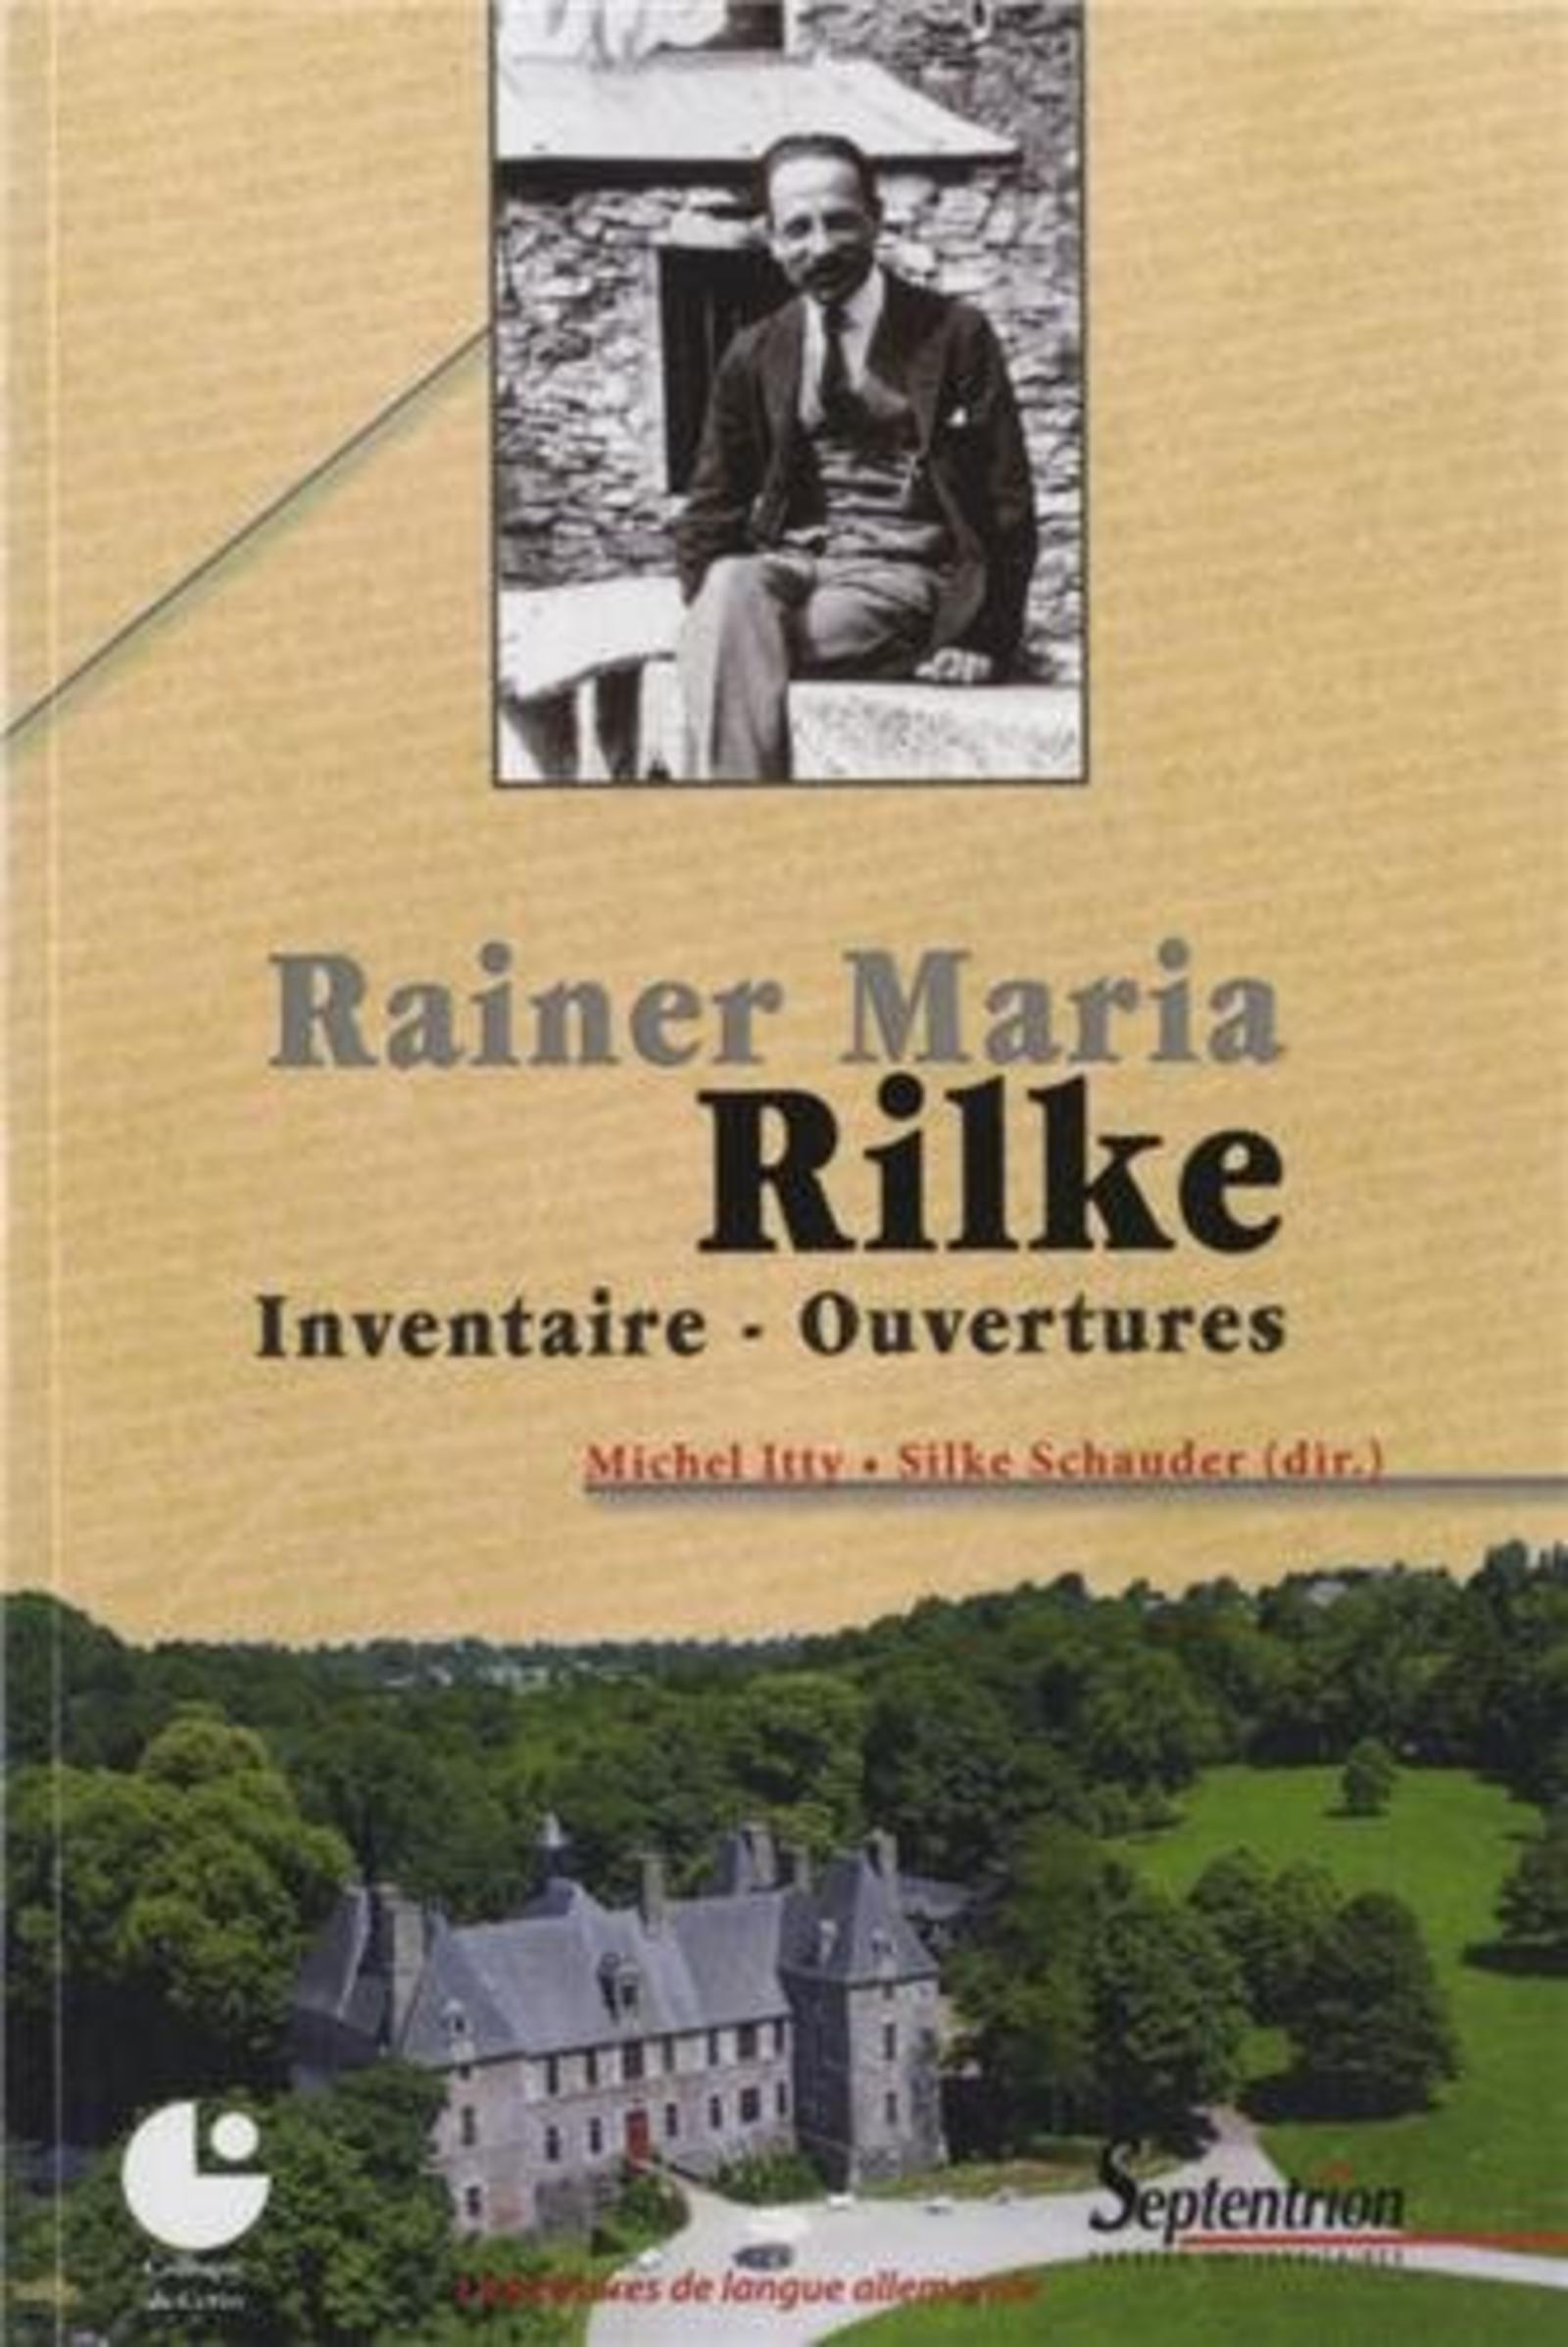 Rainer Maria Rilke, Inventaire - Ouvertures (9782757406007-front-cover)